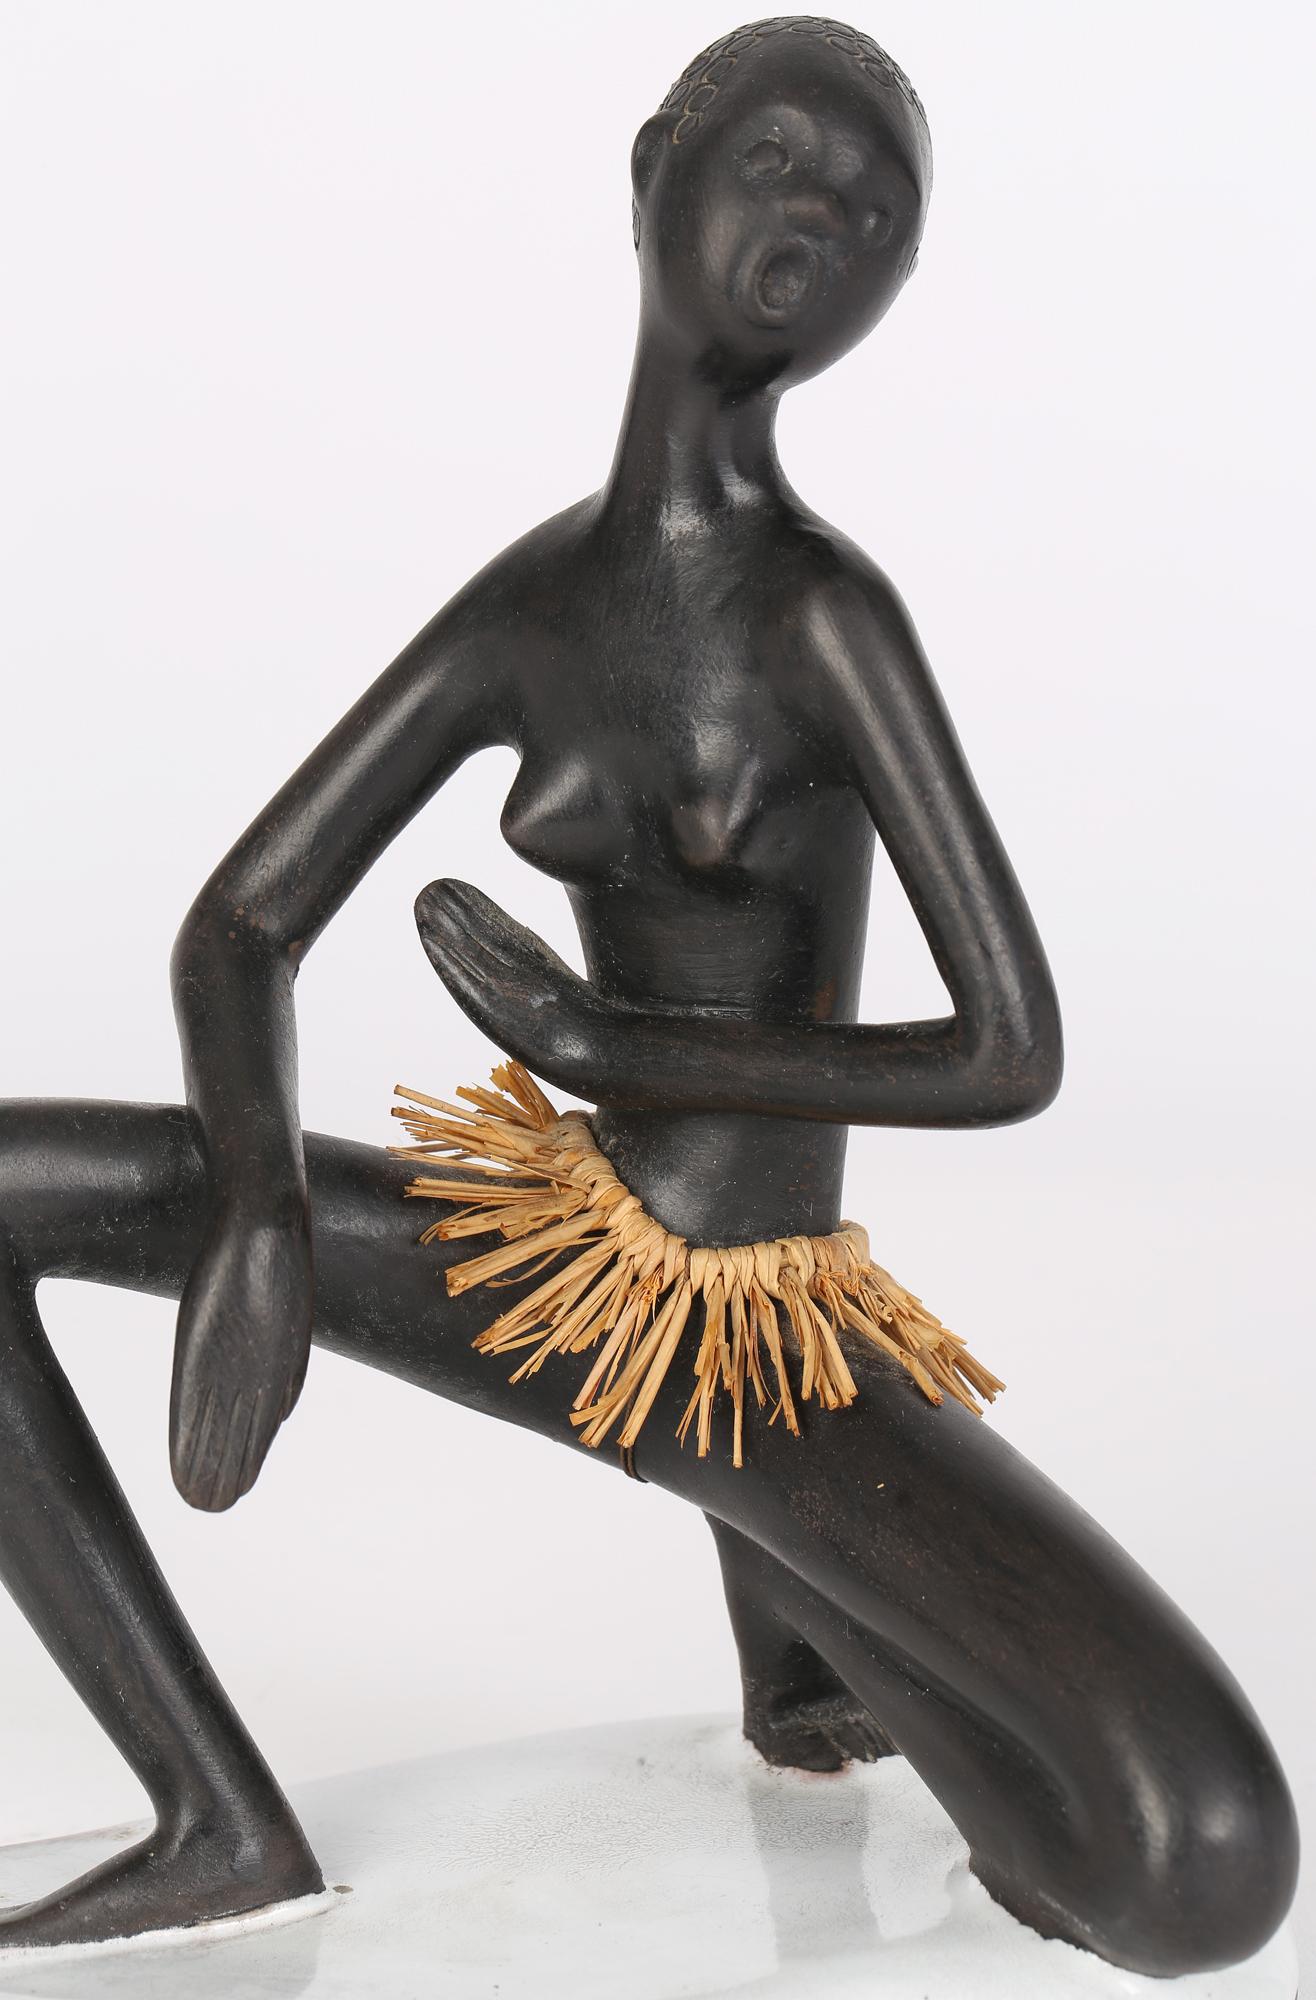 A delightful Austrian mid-century ceramic figurine portraying a nude African woman wearing a grass skirt made in Vienna by Leopold Anzengruber (1912-1979) and dating from around 1950. The woman kneels, possibly in a dance pose, on a shaped base